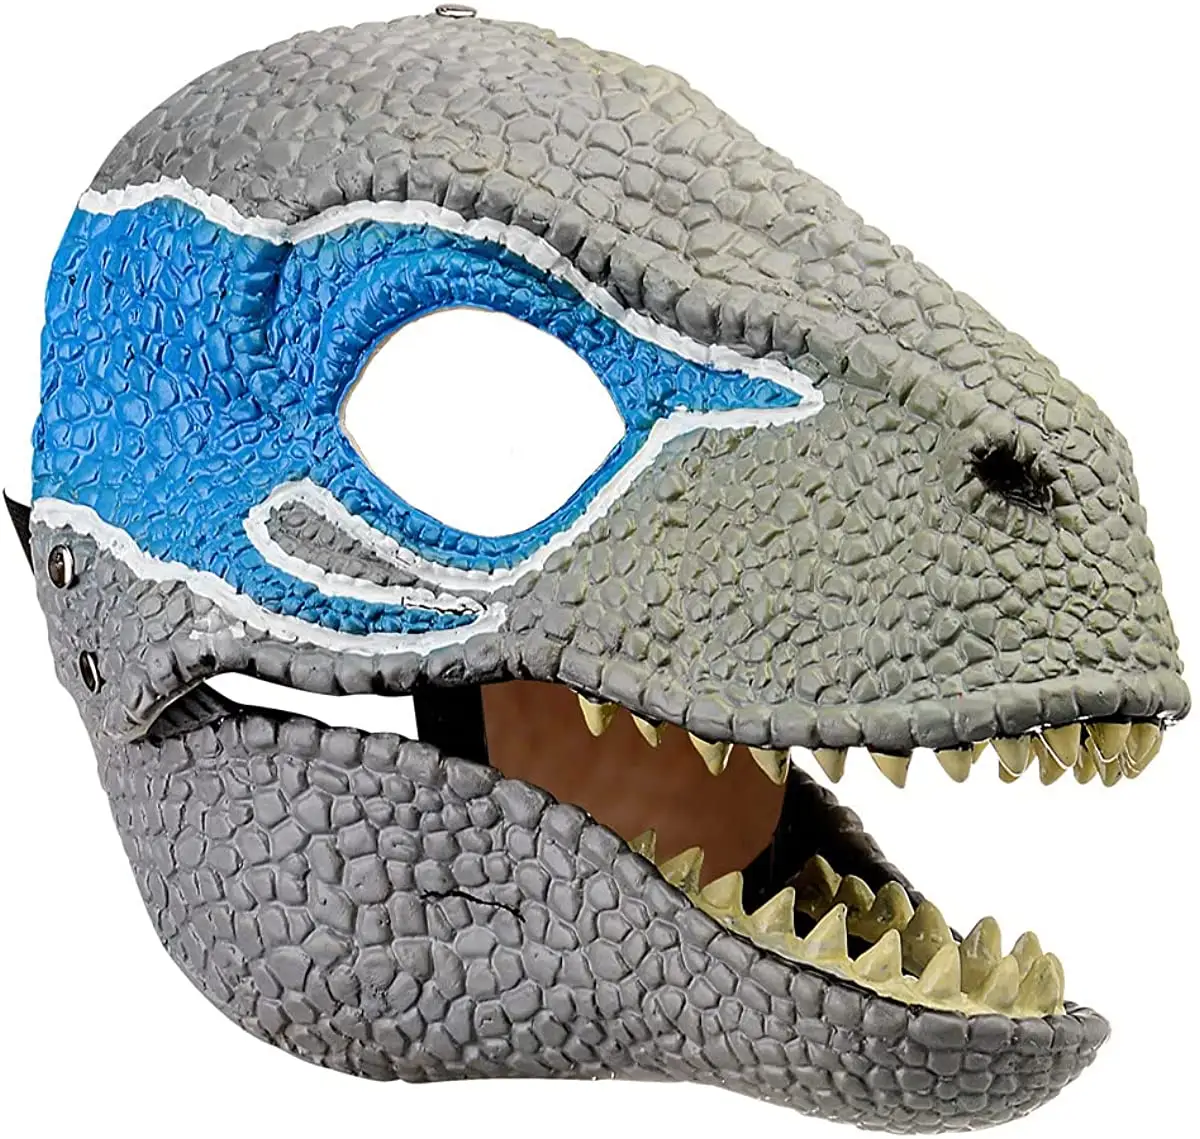 Costumes Party Christmas Gifts Cosplay Party Birthday Halloween Movable Dragon Moving Jaw Decor Dino Dinosaur Mask